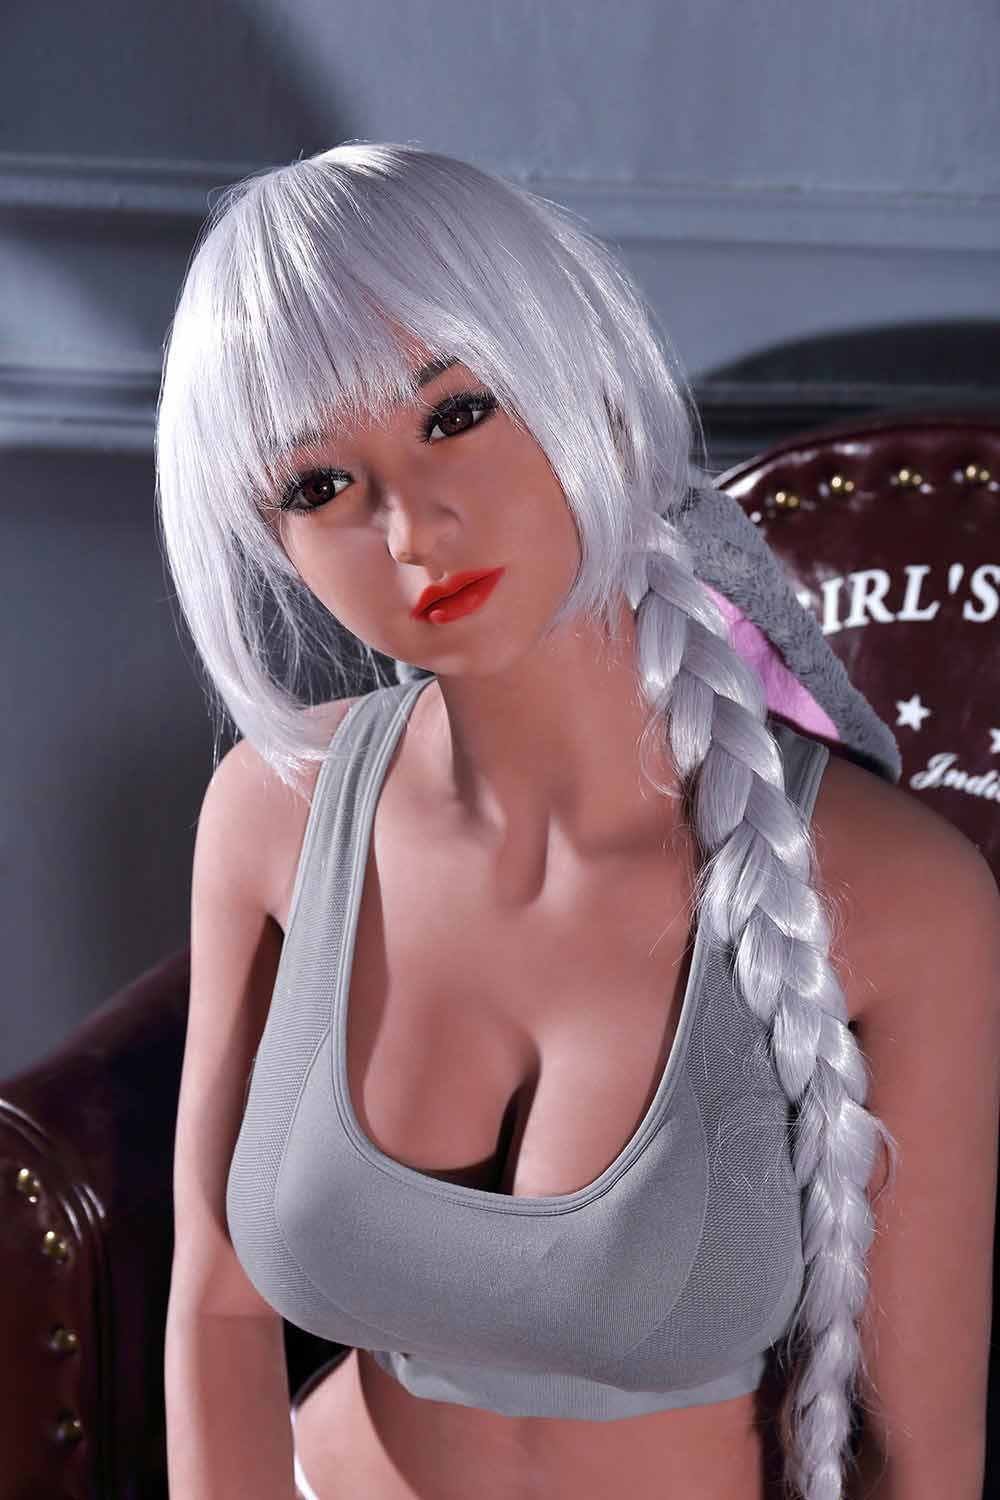 Sex doll with braids